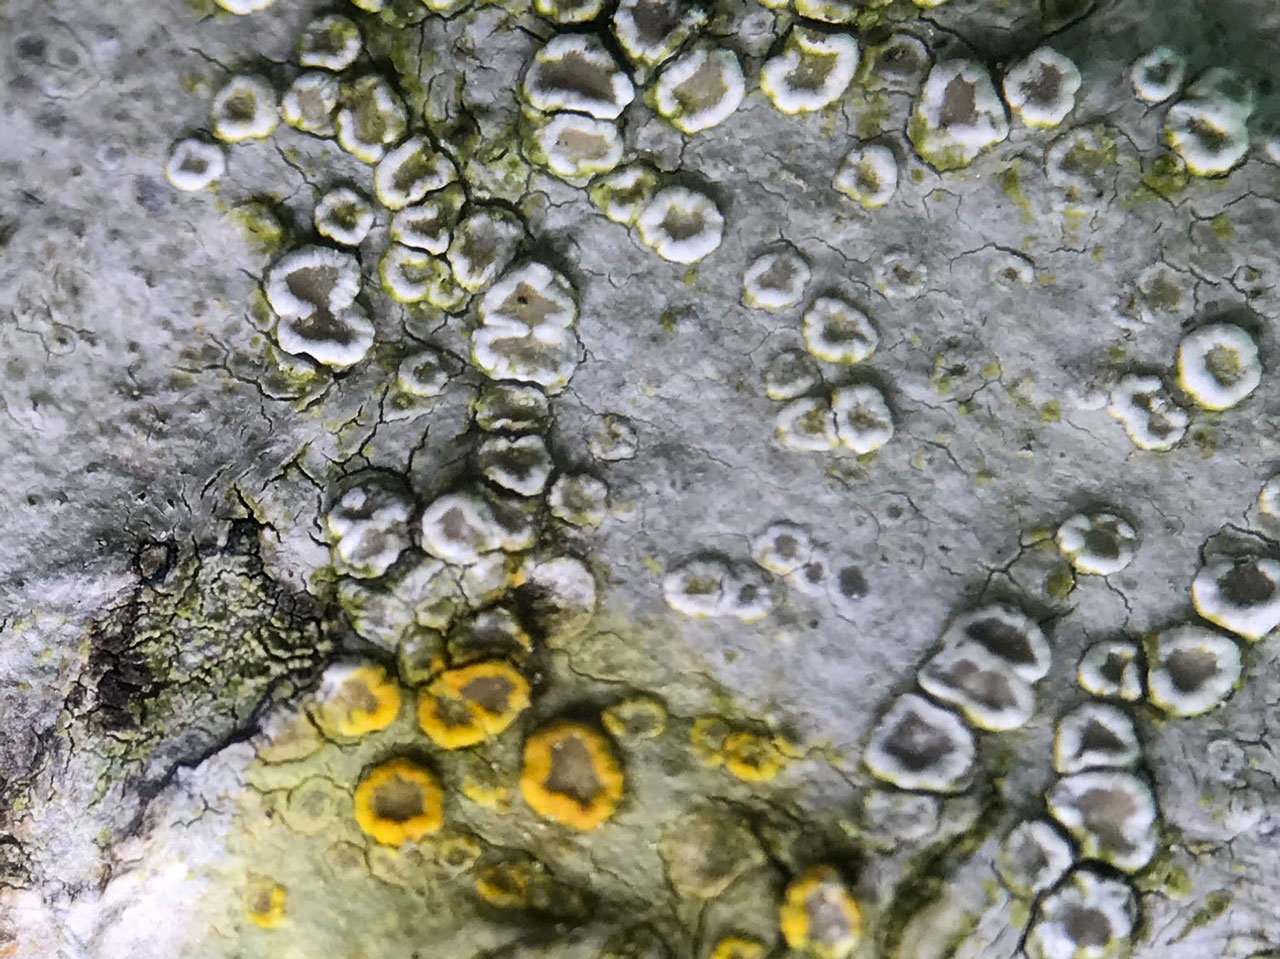 Lecanora intumescens, Ashurst Lodge, New Forest